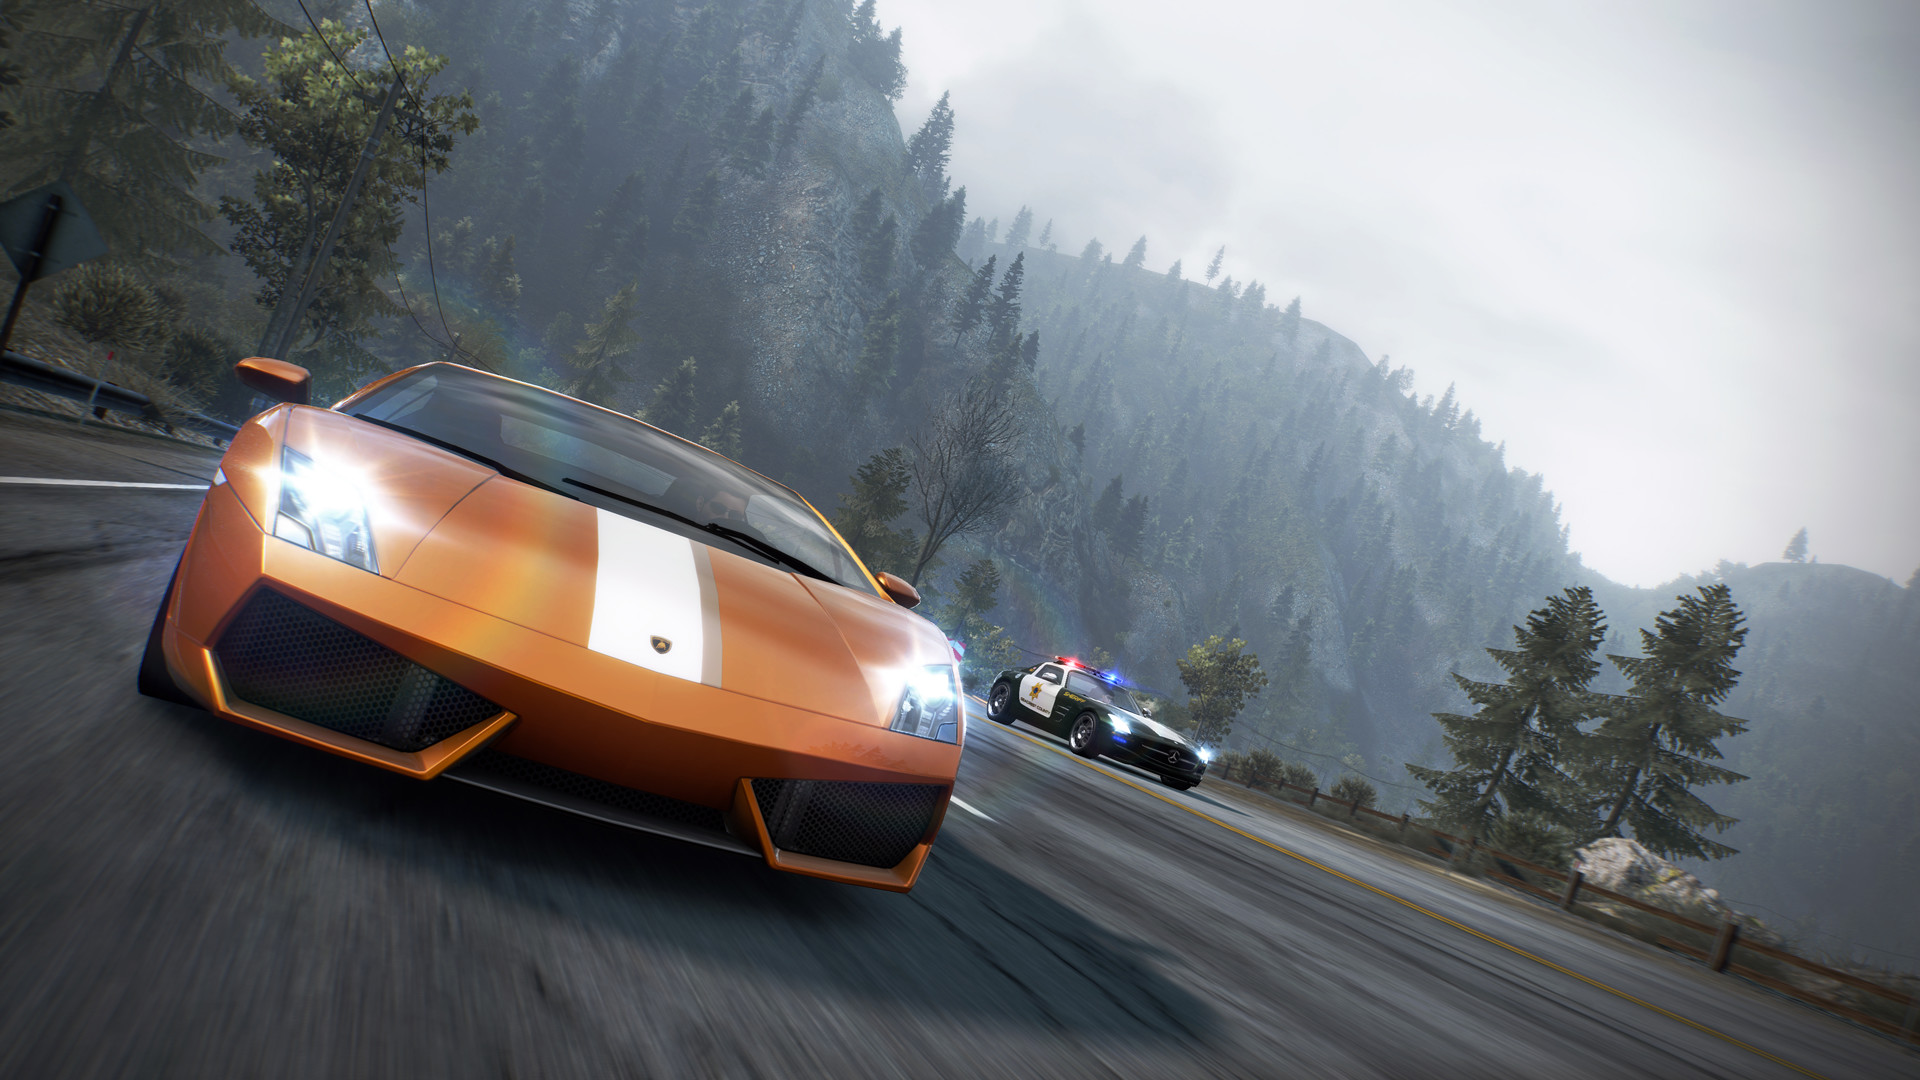 Codemasters is co-developing Need for Speed 2022